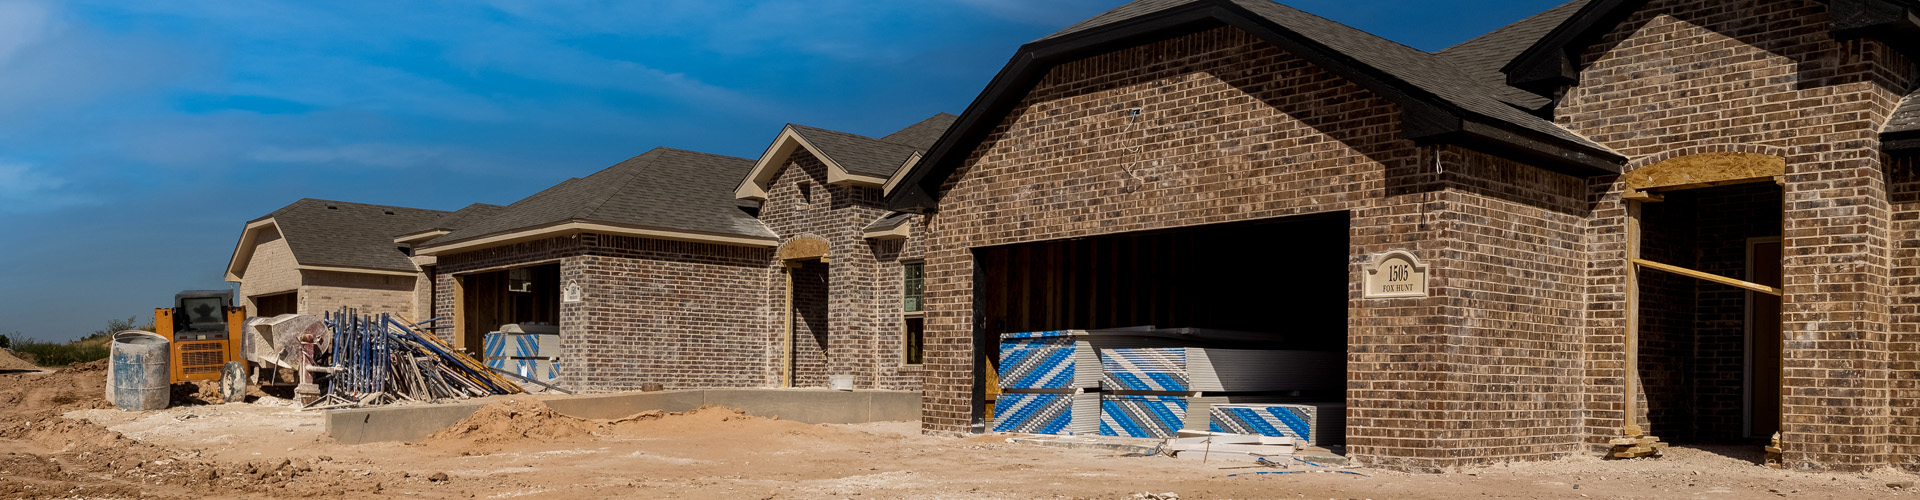 New Homes for Sale in Fox Hollow Amarillo TX